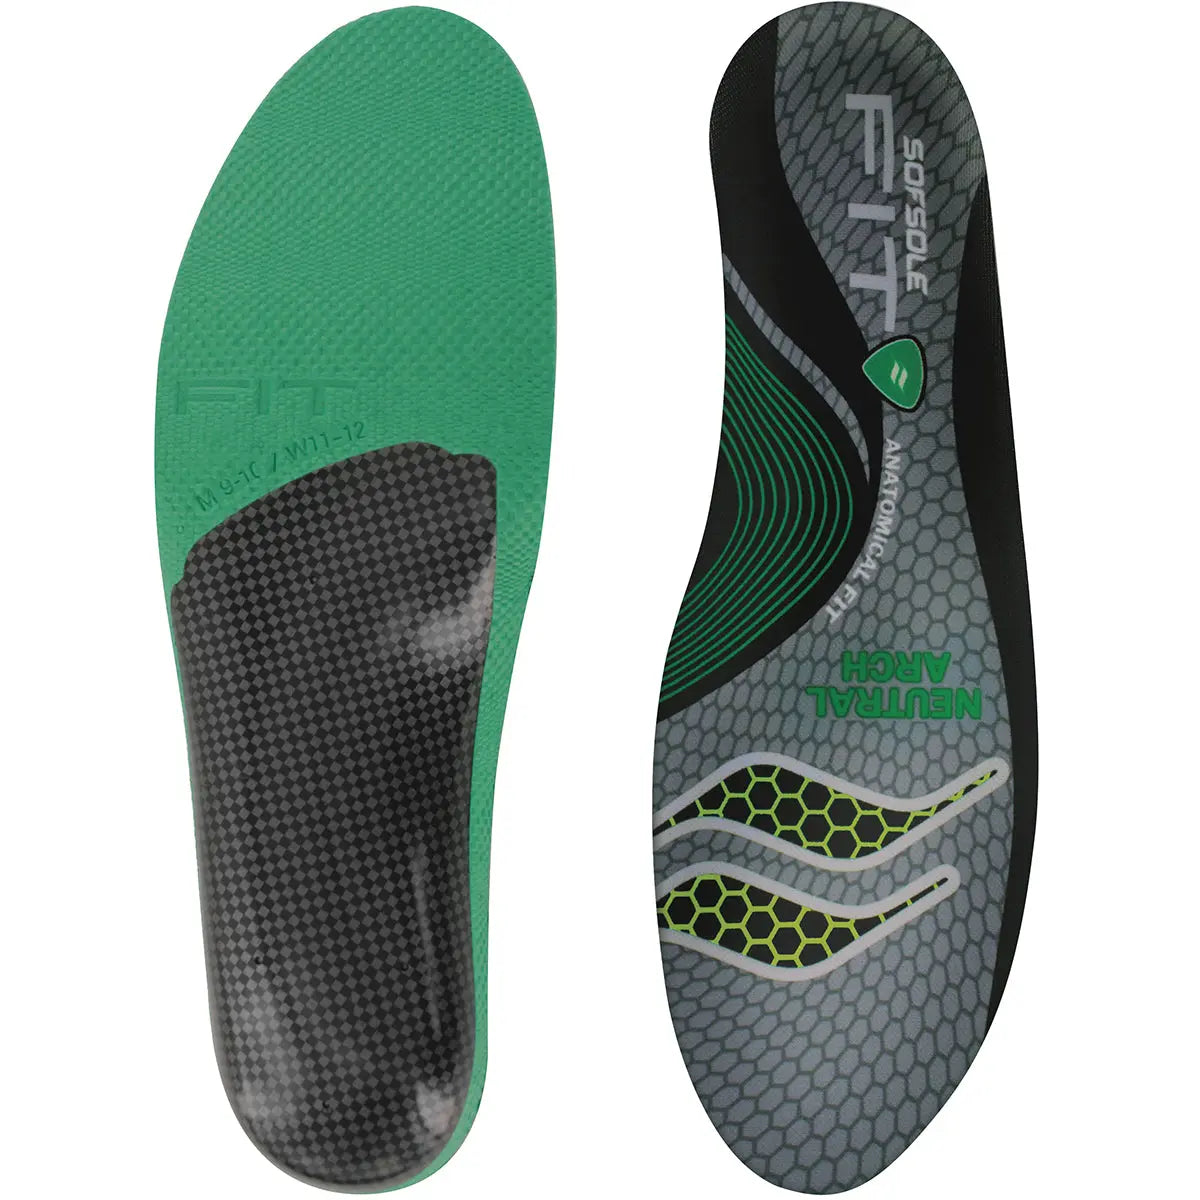 Sof Sole Fit Series Neutral Arch Shoe Insoles SofSole